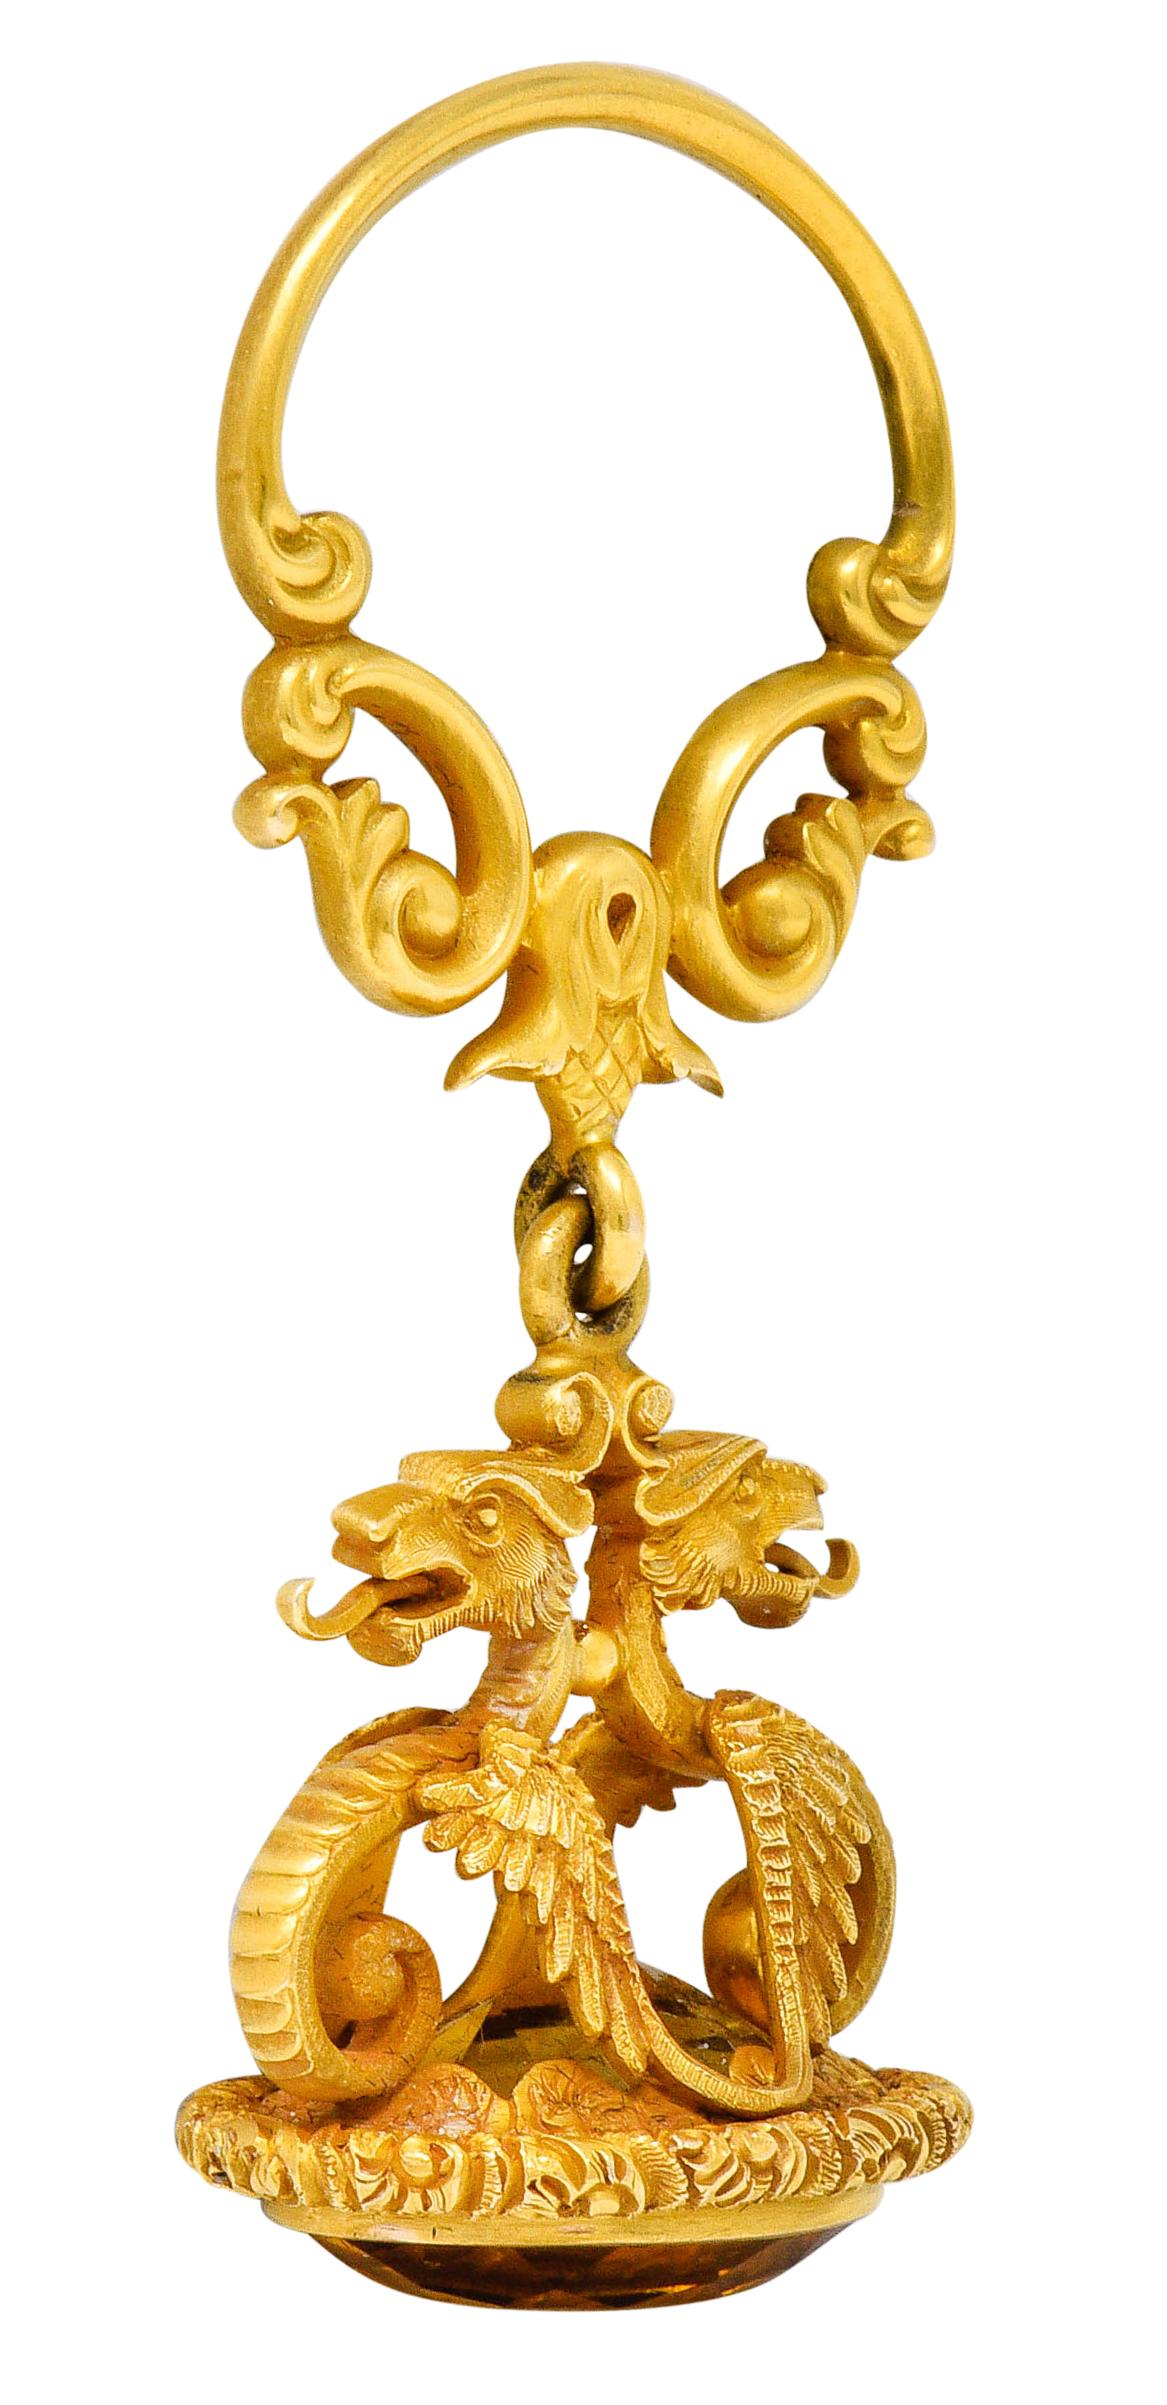 Pendant is designed with a whiplashed door-knocker style bale that terminates as a thistle motif

Suspending a fob comprised of two mirrored dragons on a deeply engraved floral base

Extraordinarily detailed with flickering tongues, scrolled